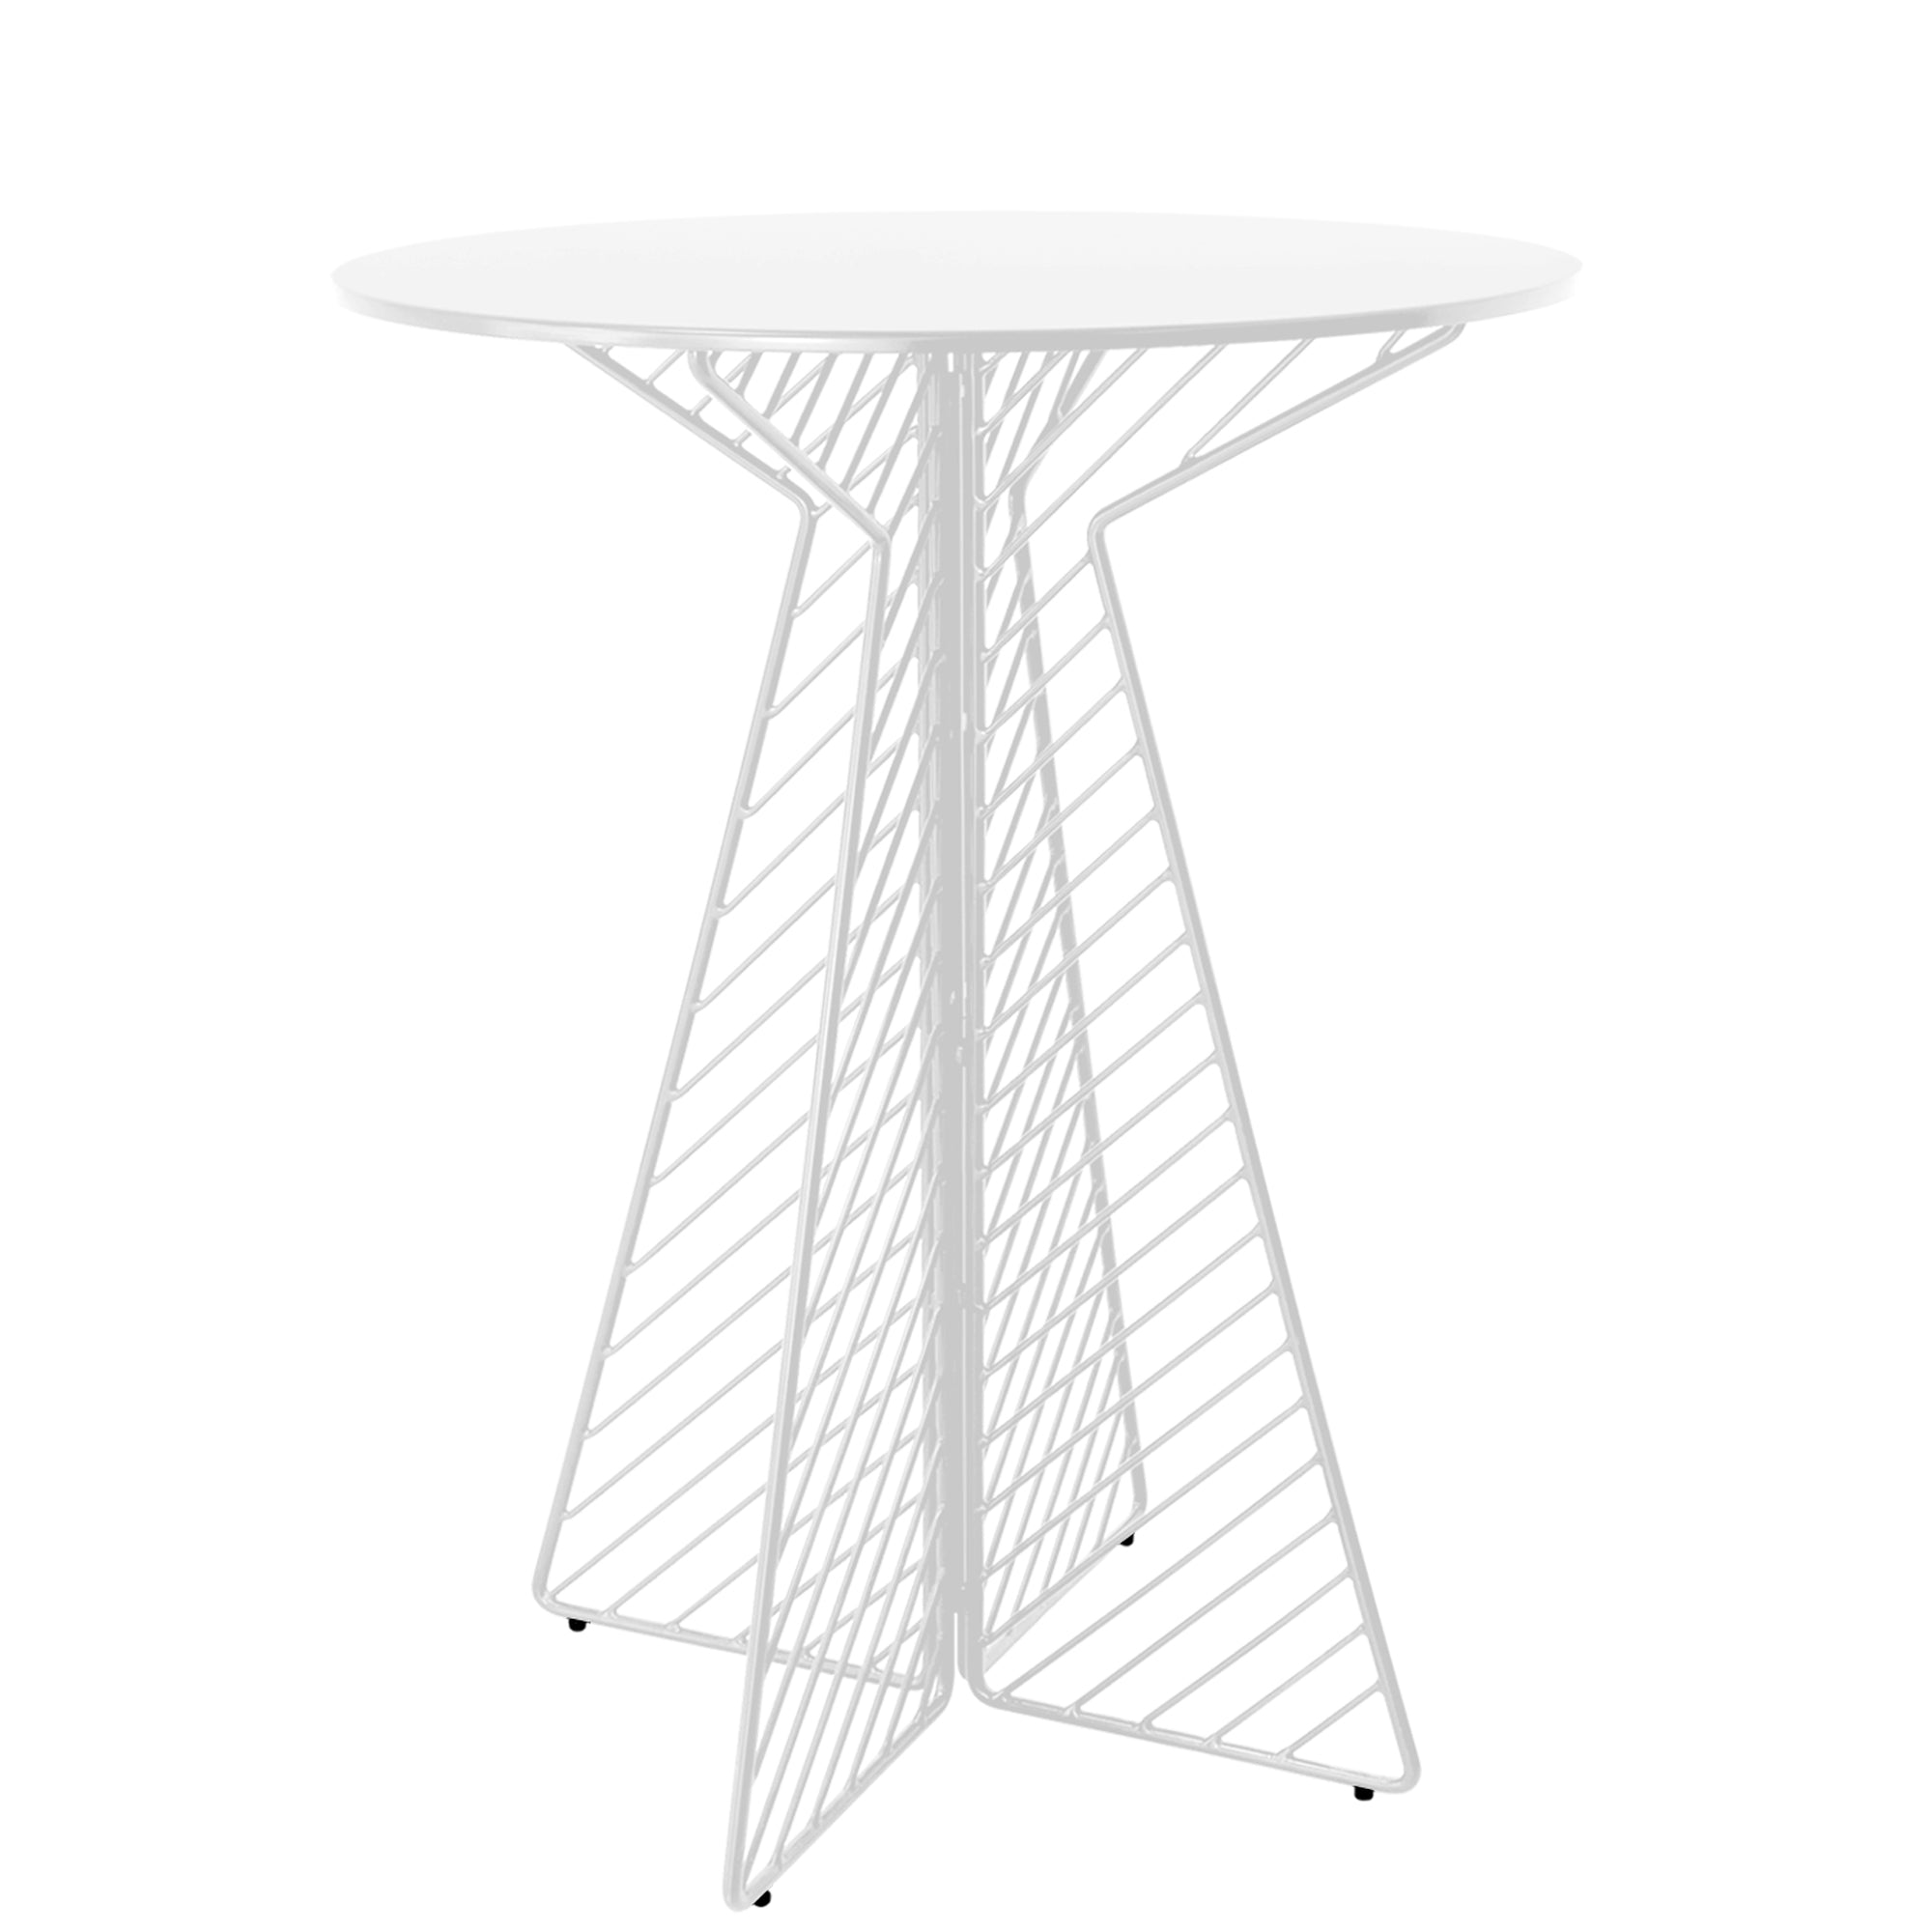 Bend Goods Cafe Bar Table - White